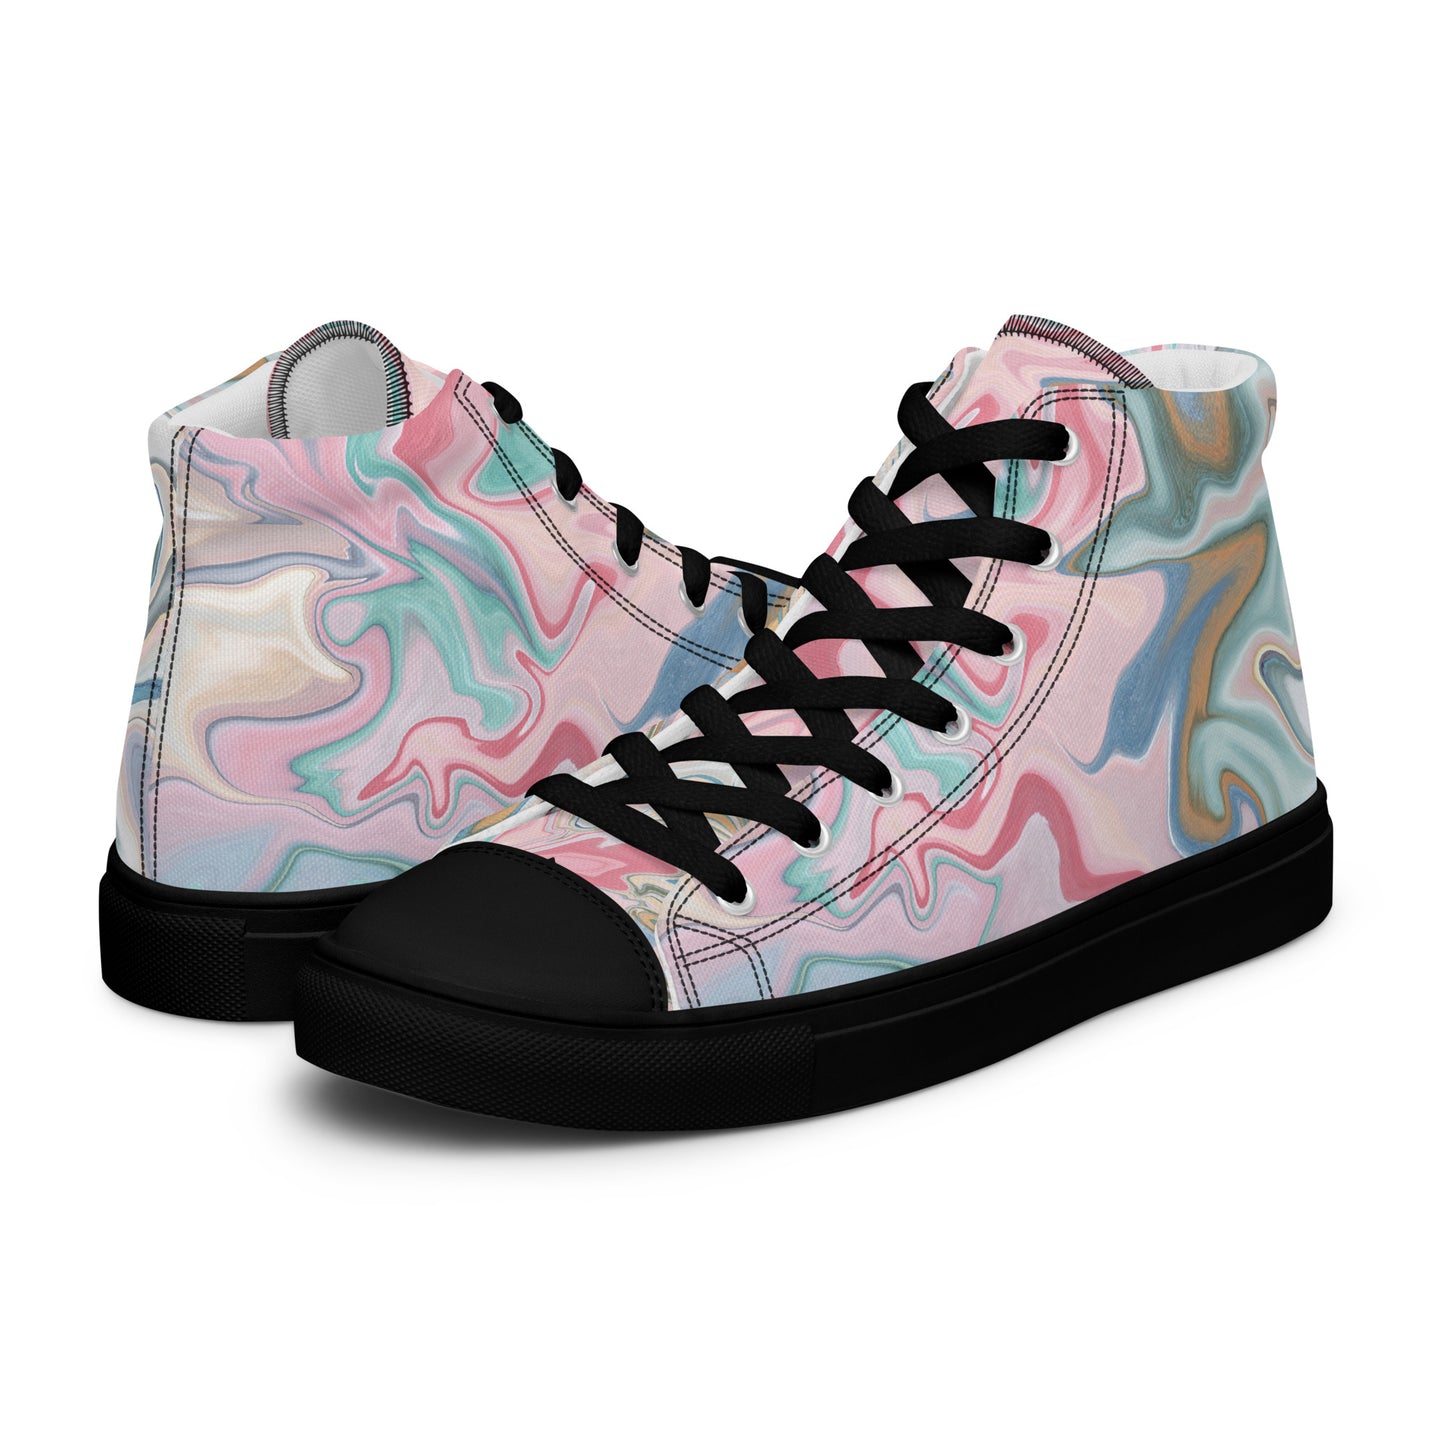 Women’s Ink Pond high top canvas shoes